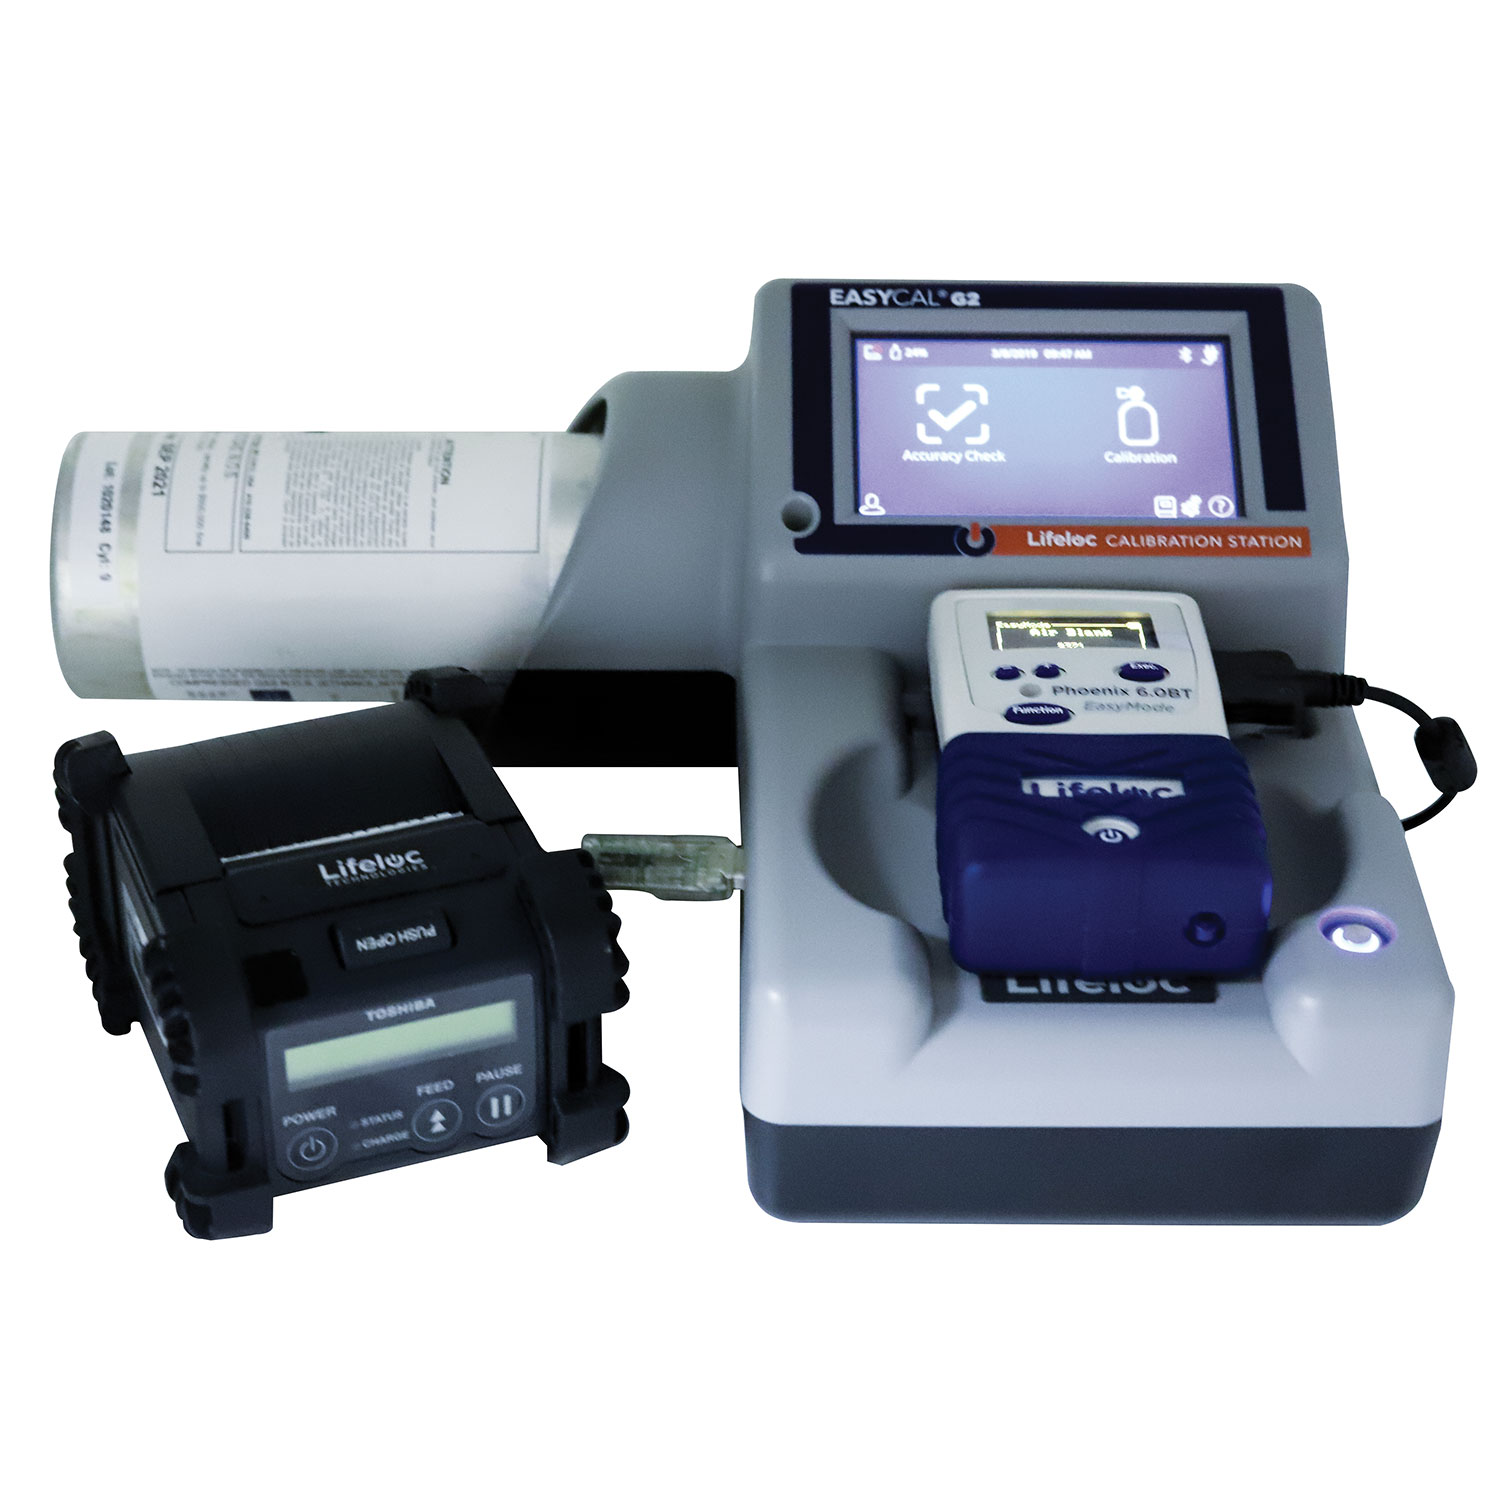 EASYCAL G2 Calibration Station with Phoenix 6.0BT